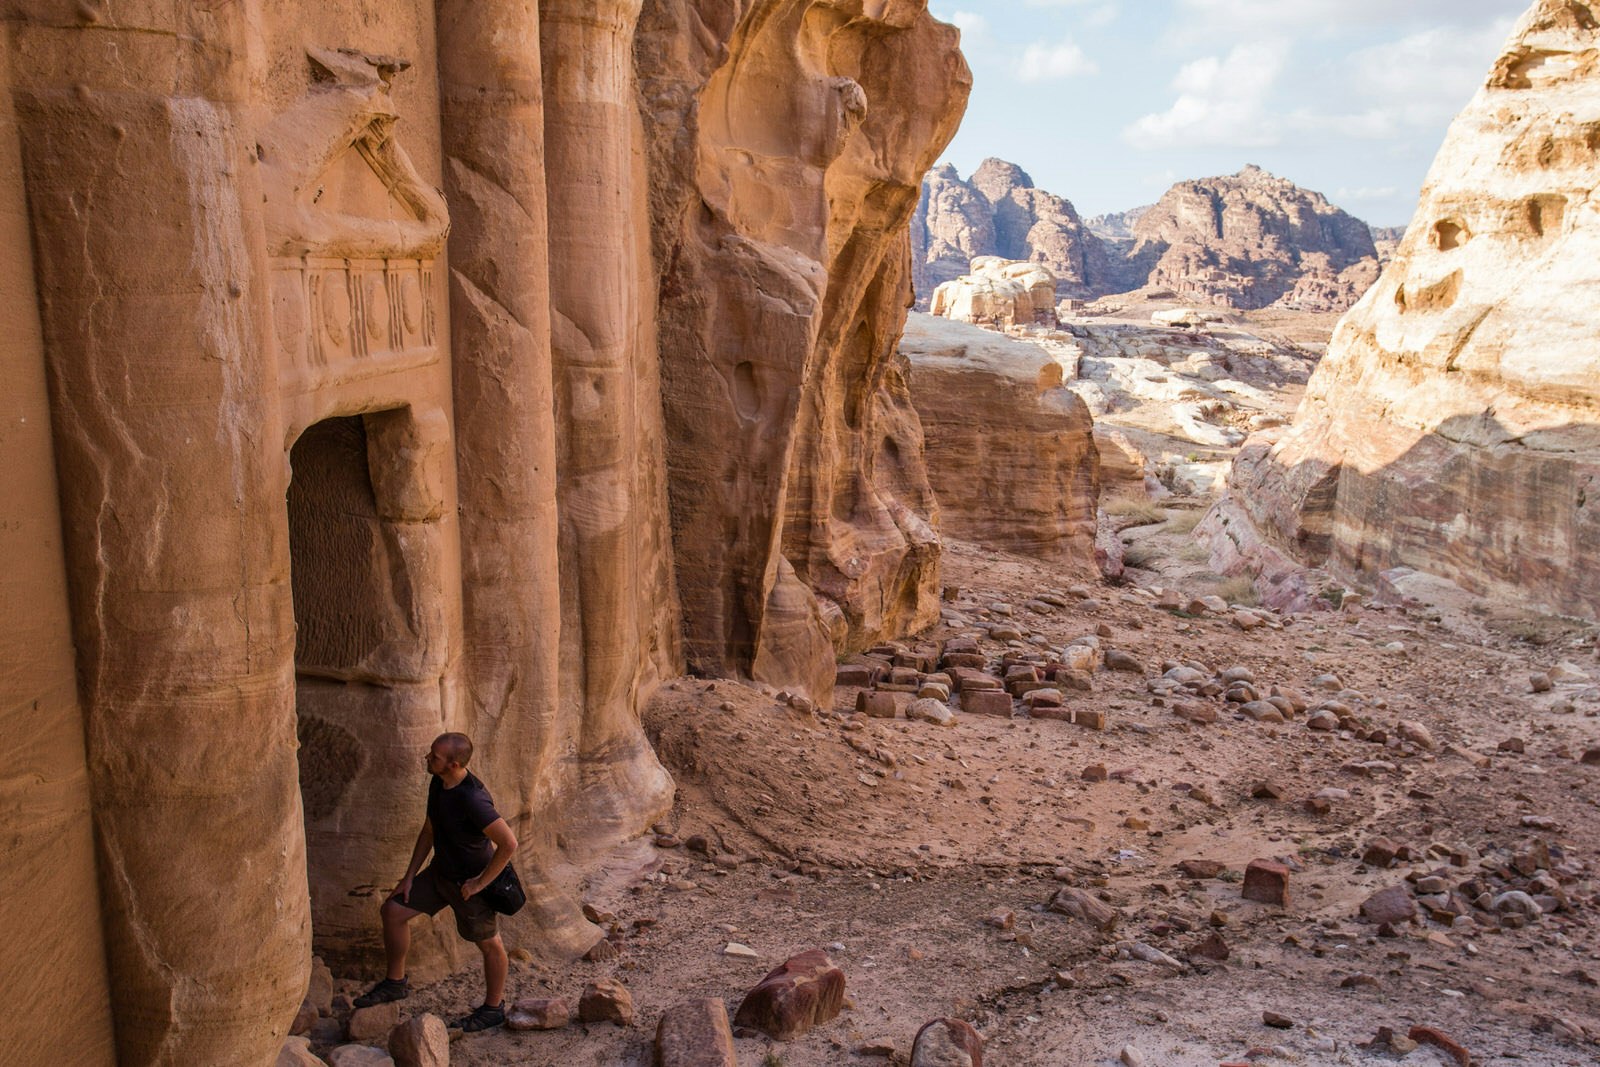 Exploring the tombs of the Wadi Farasa. Image by Stephen Lioy / Lonely Planet